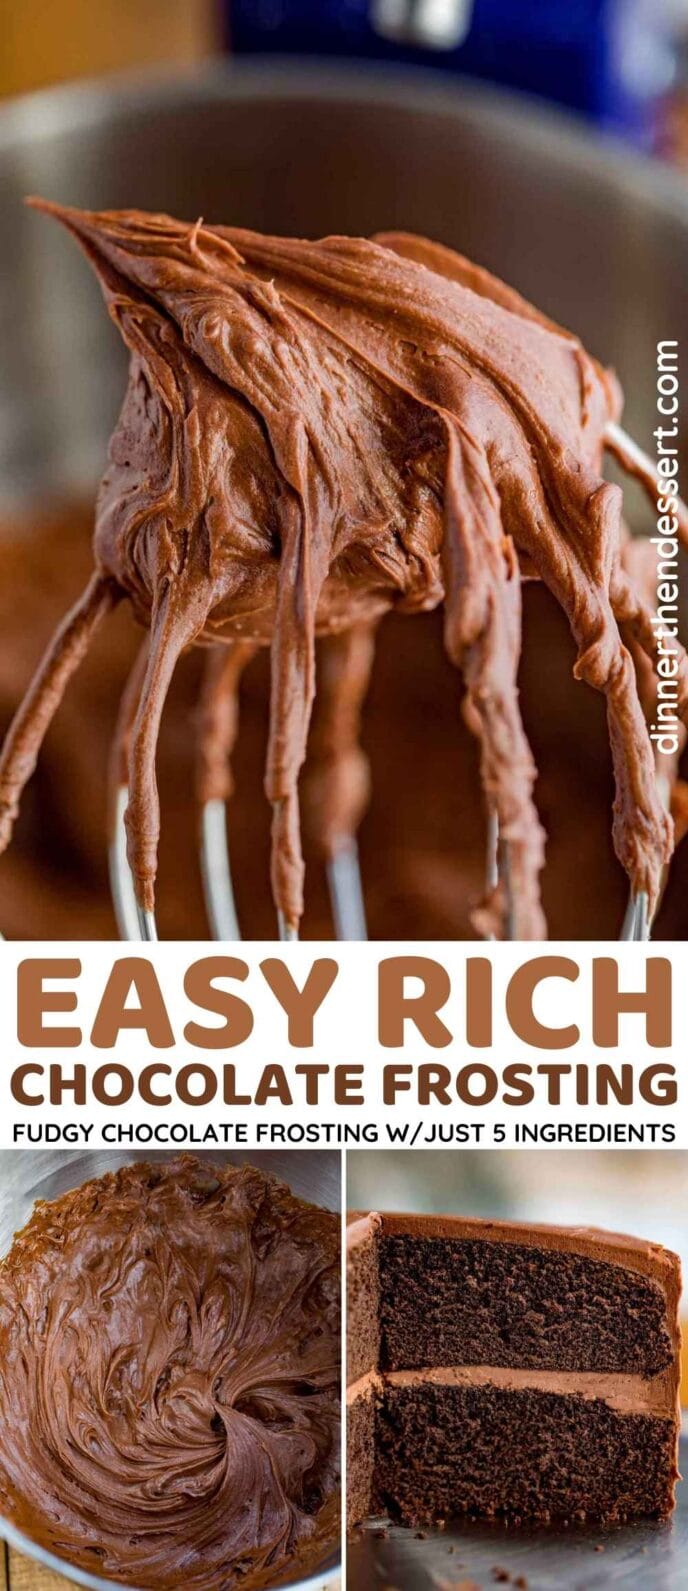 Rich Chocolate Frosting Collage